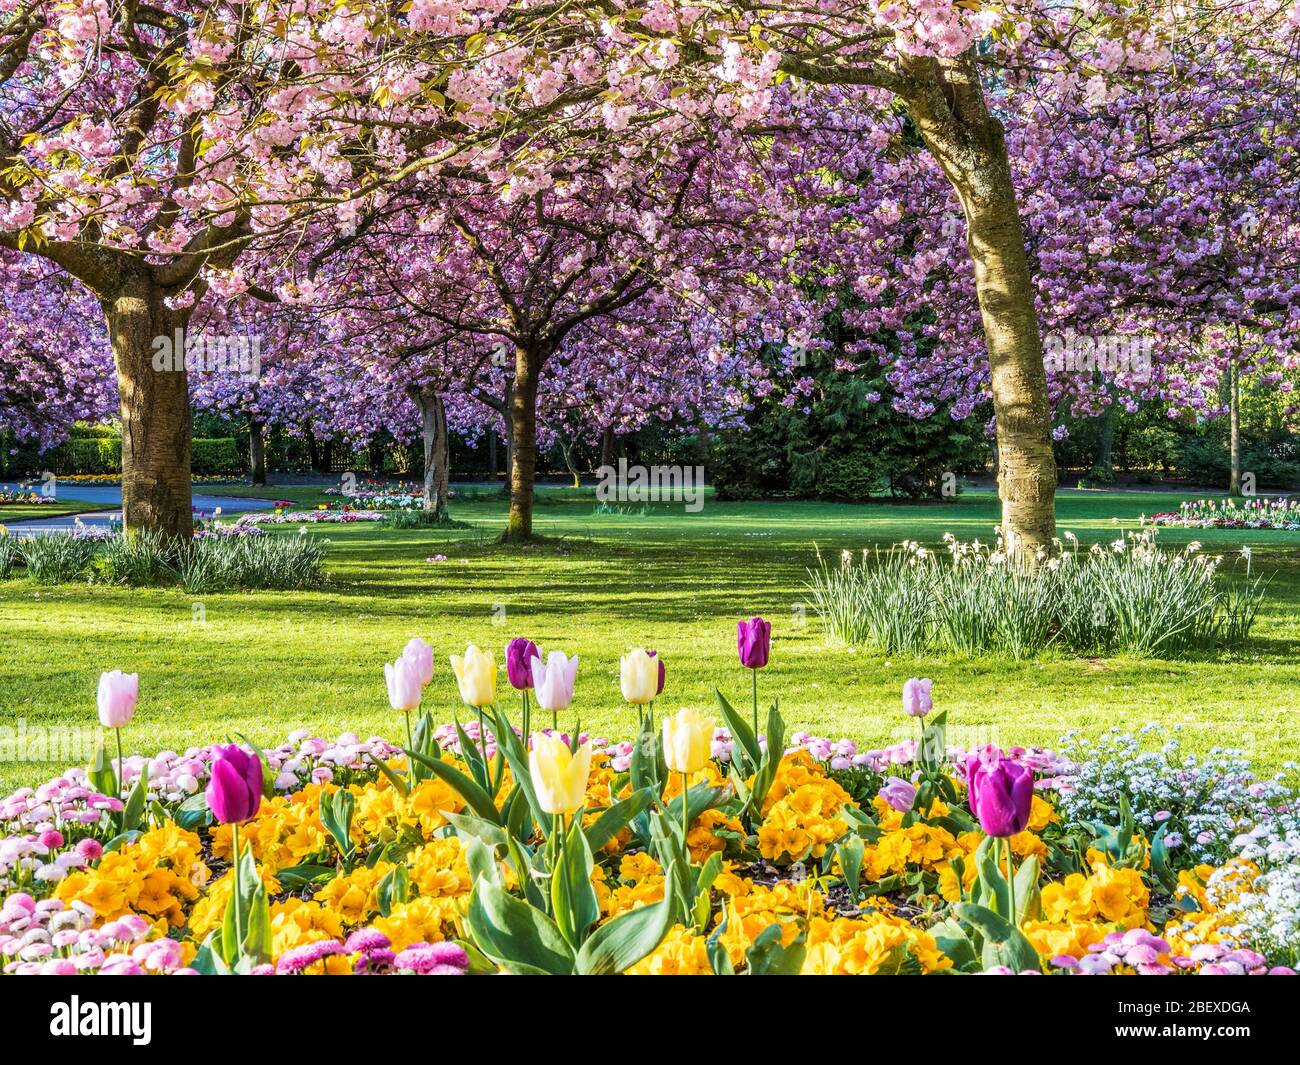 A bed of tulips, yellow primulas and pink Bellis daisies with flowering pink cherry trees in the background in an urban public park in England. Stock Photo